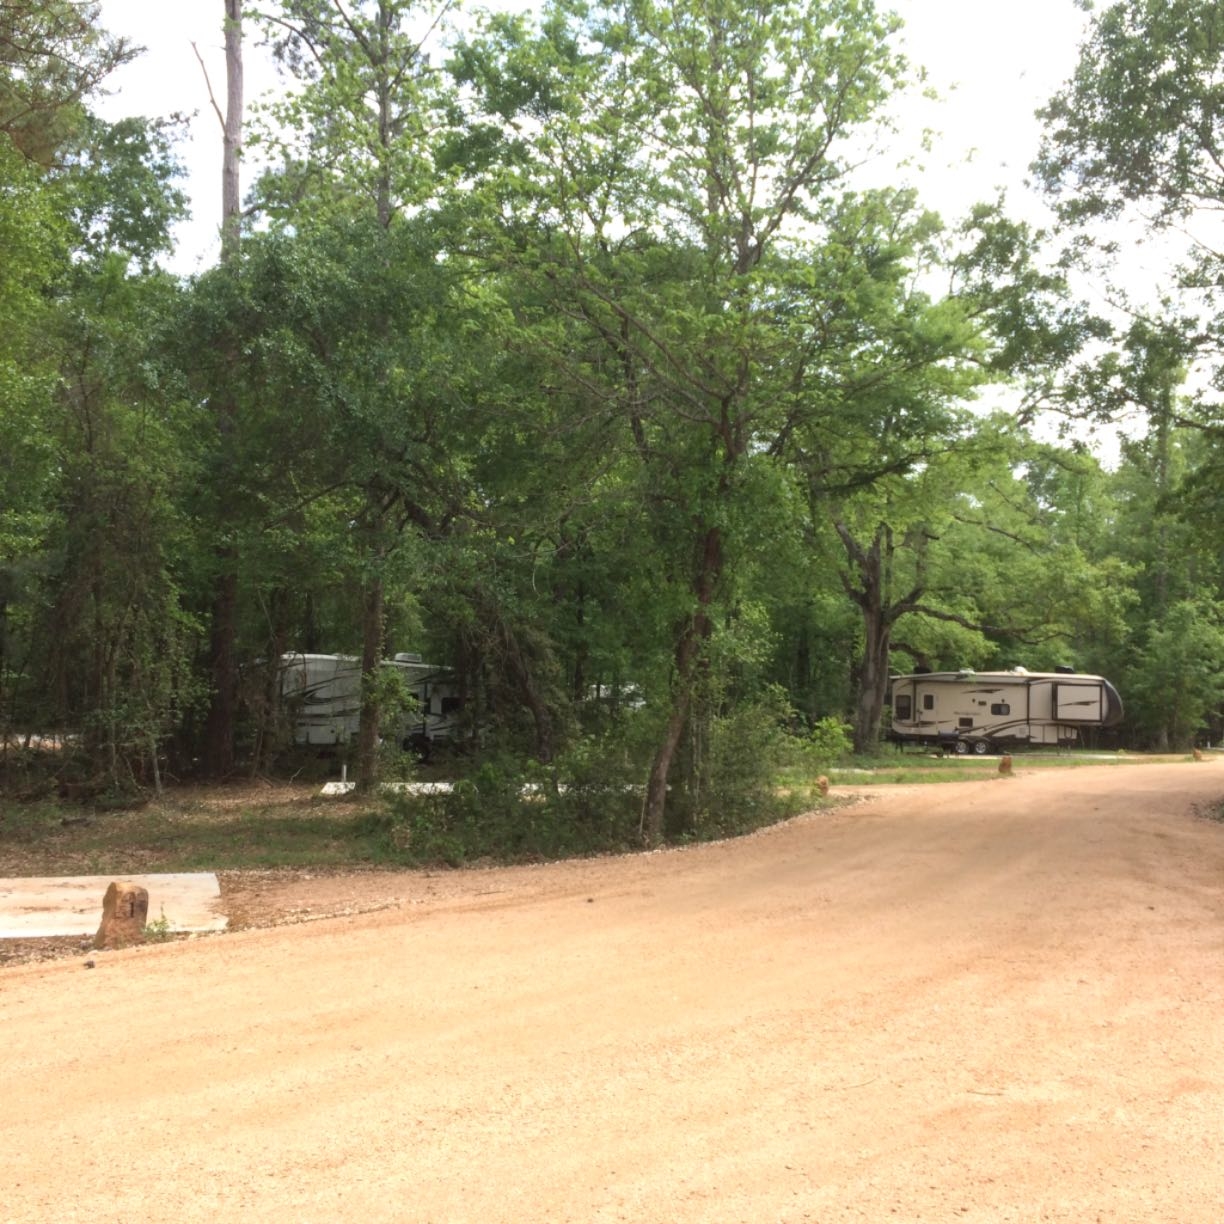 Another beautiful day here at Magnolia Forest RV Park!